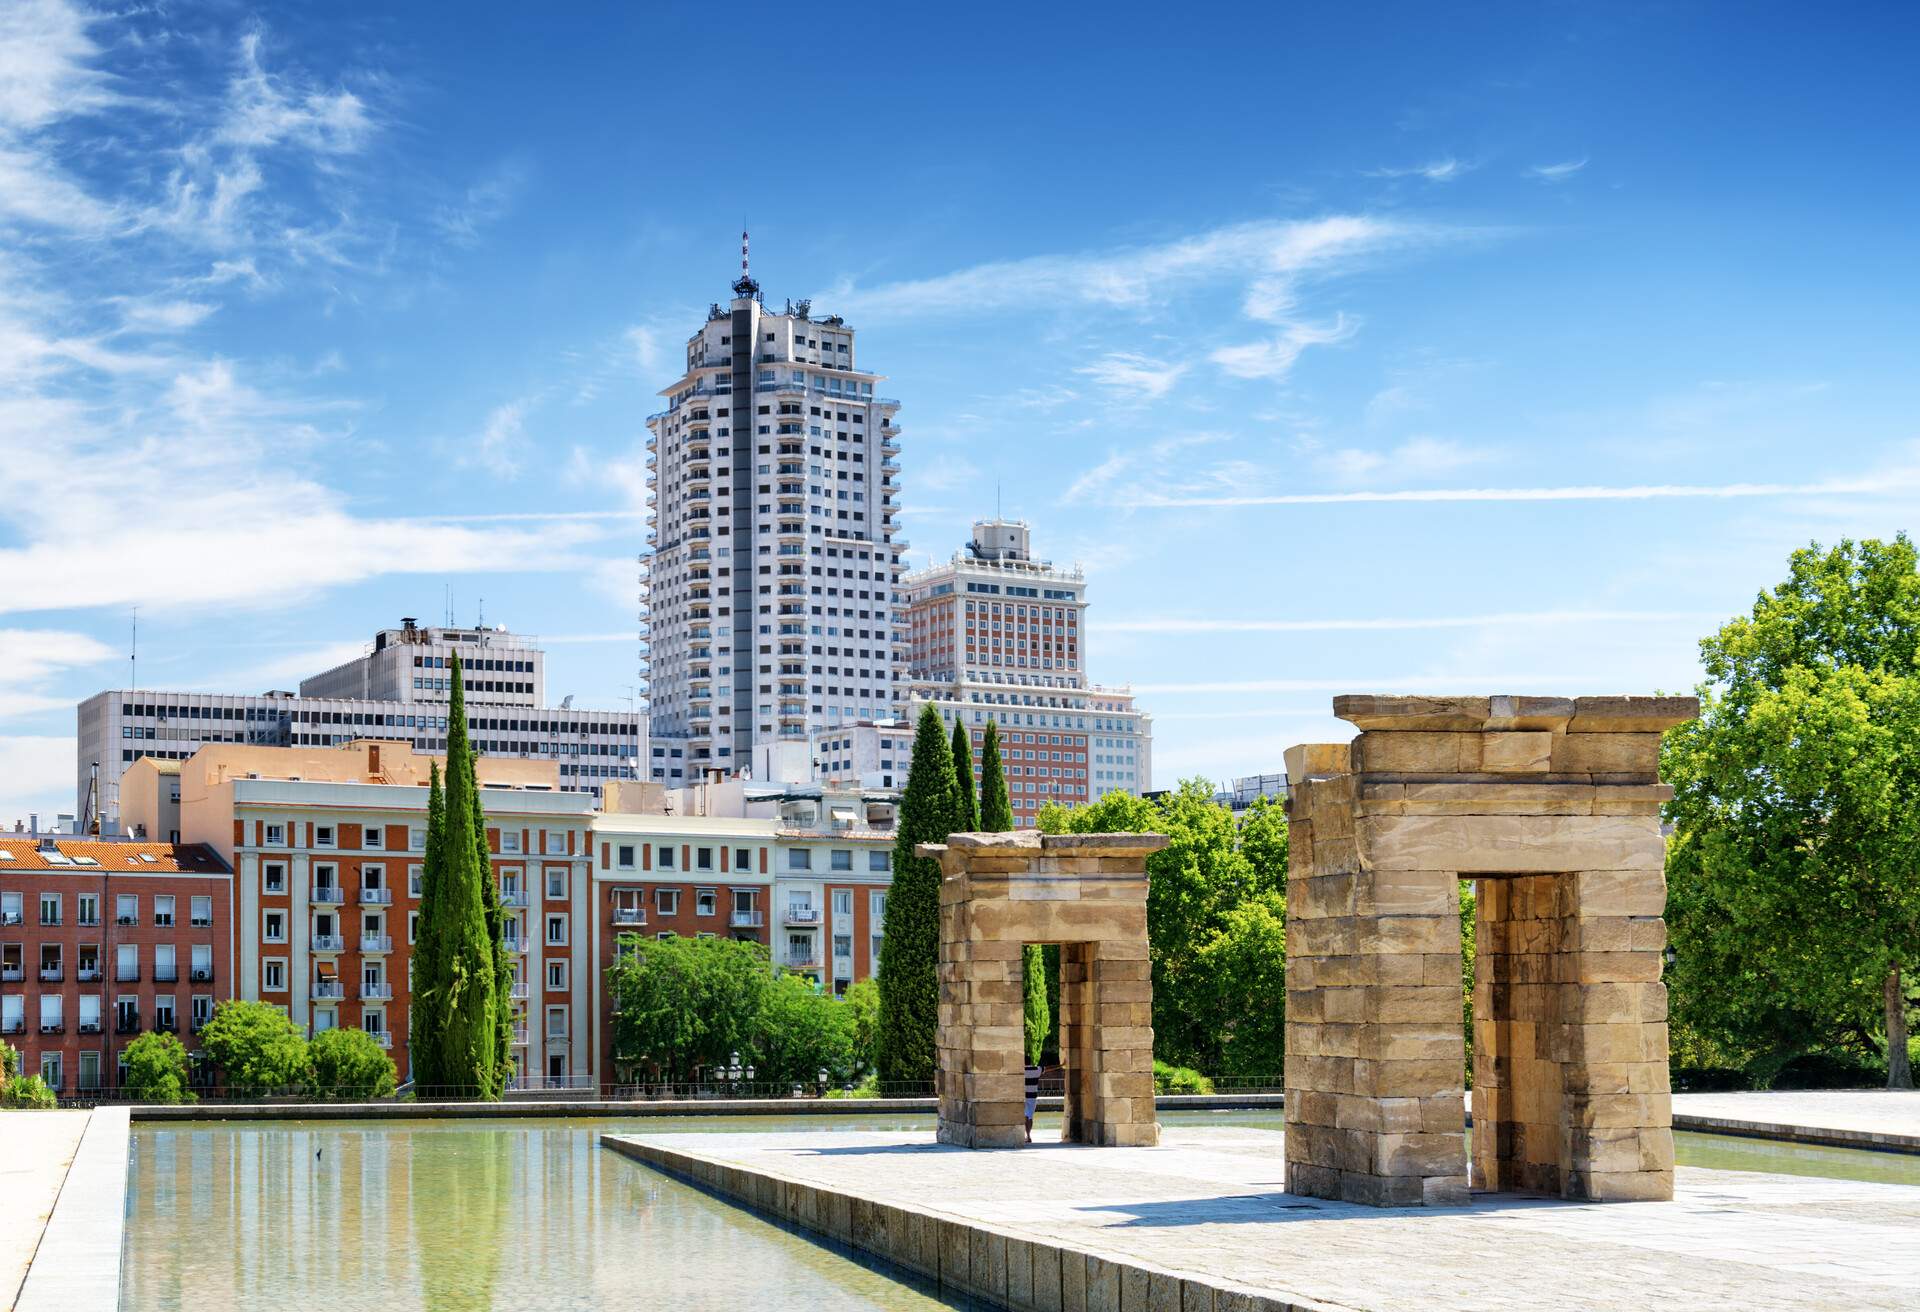 Gates to the Temple of Debod, ancient Egyptian temple, in the Parque del Oeste (Western Park) in Spain. Buildings of Madrid in the background. Madrid is a popular tourist destination of Europe.; Shutterstock ID 273100988